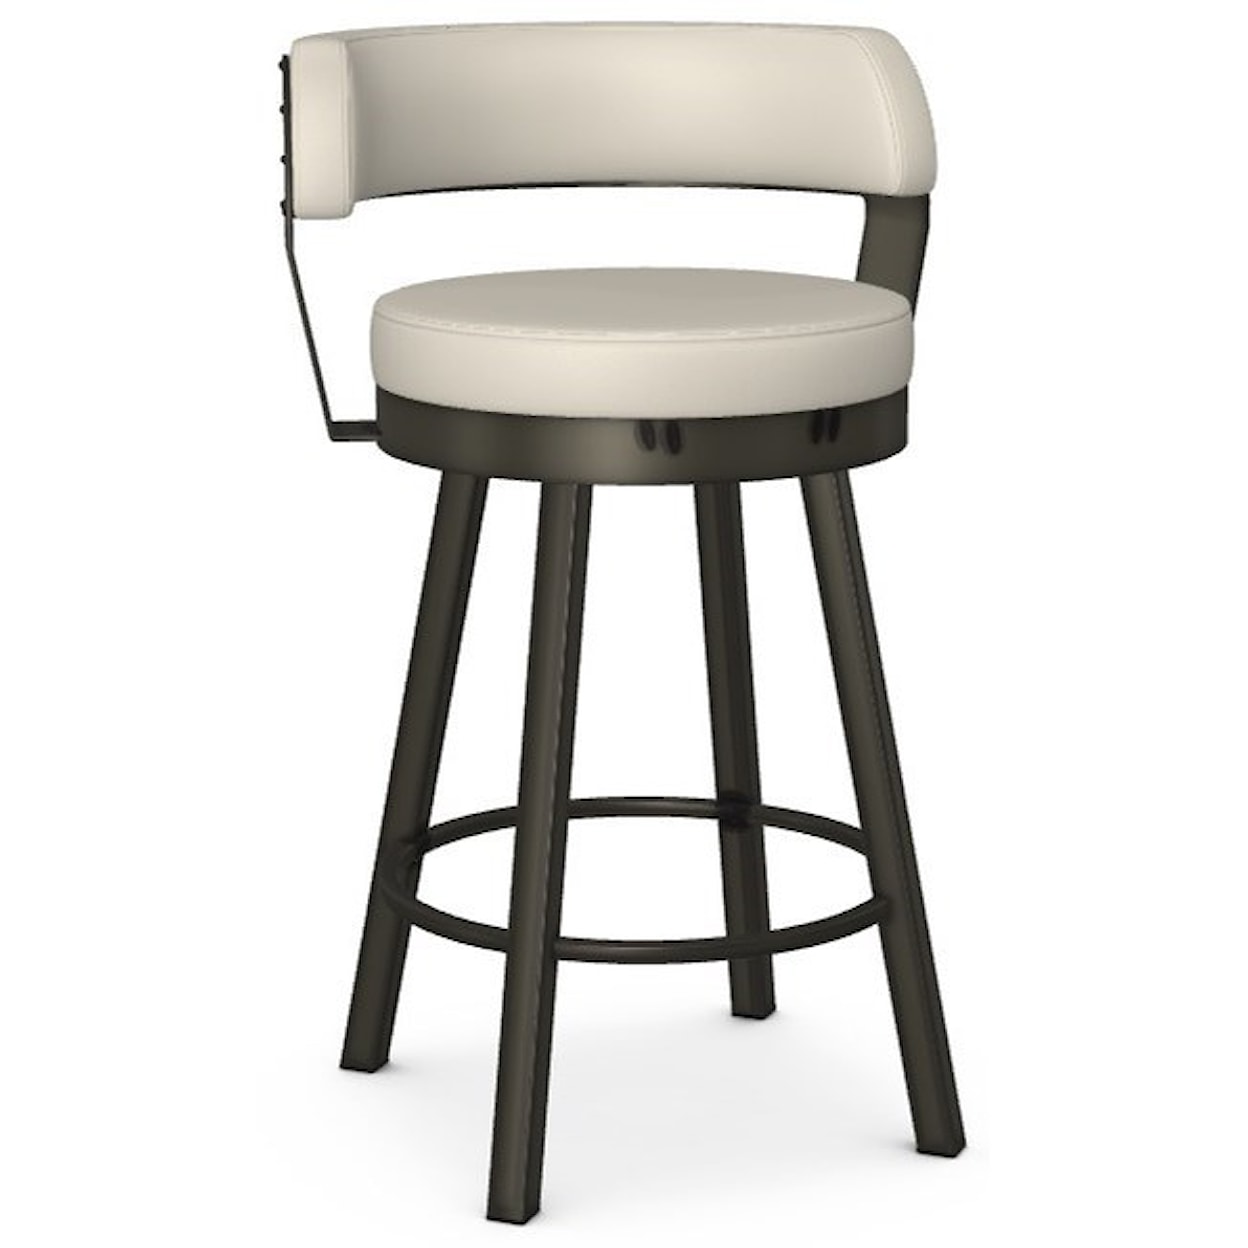 Amisco Industrial 26" Russell Swivel Stool